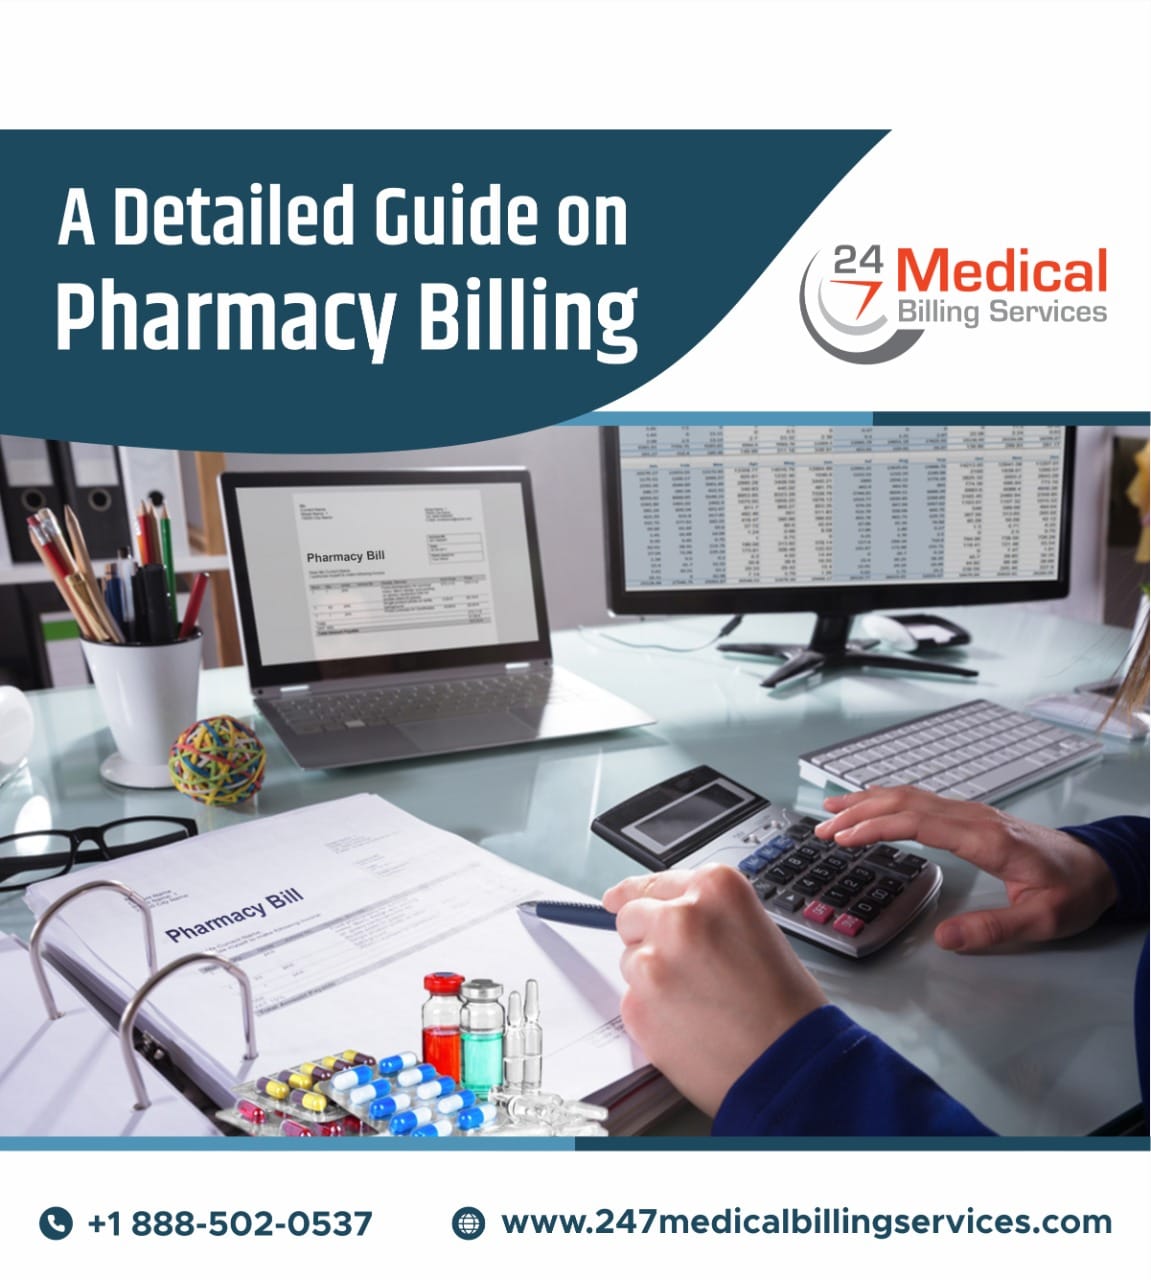  A Detailed Guide on Pharmacy Billing